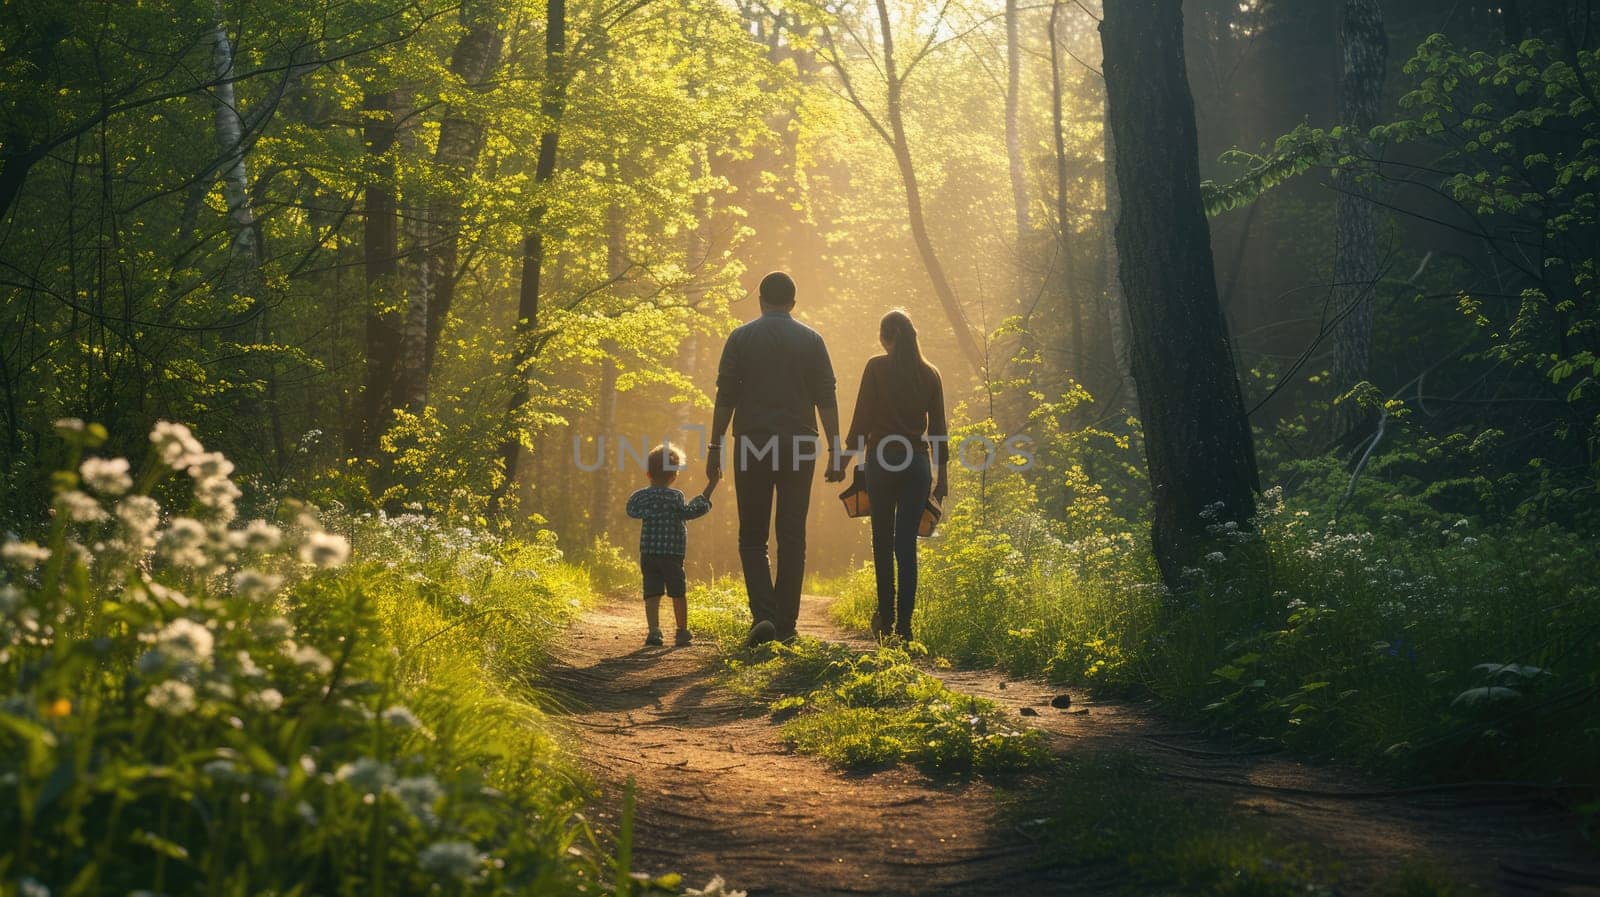 A woman and child stroll through a forest, hand in hand, amidst trees, plants, and natural woodland landscape. AIG41